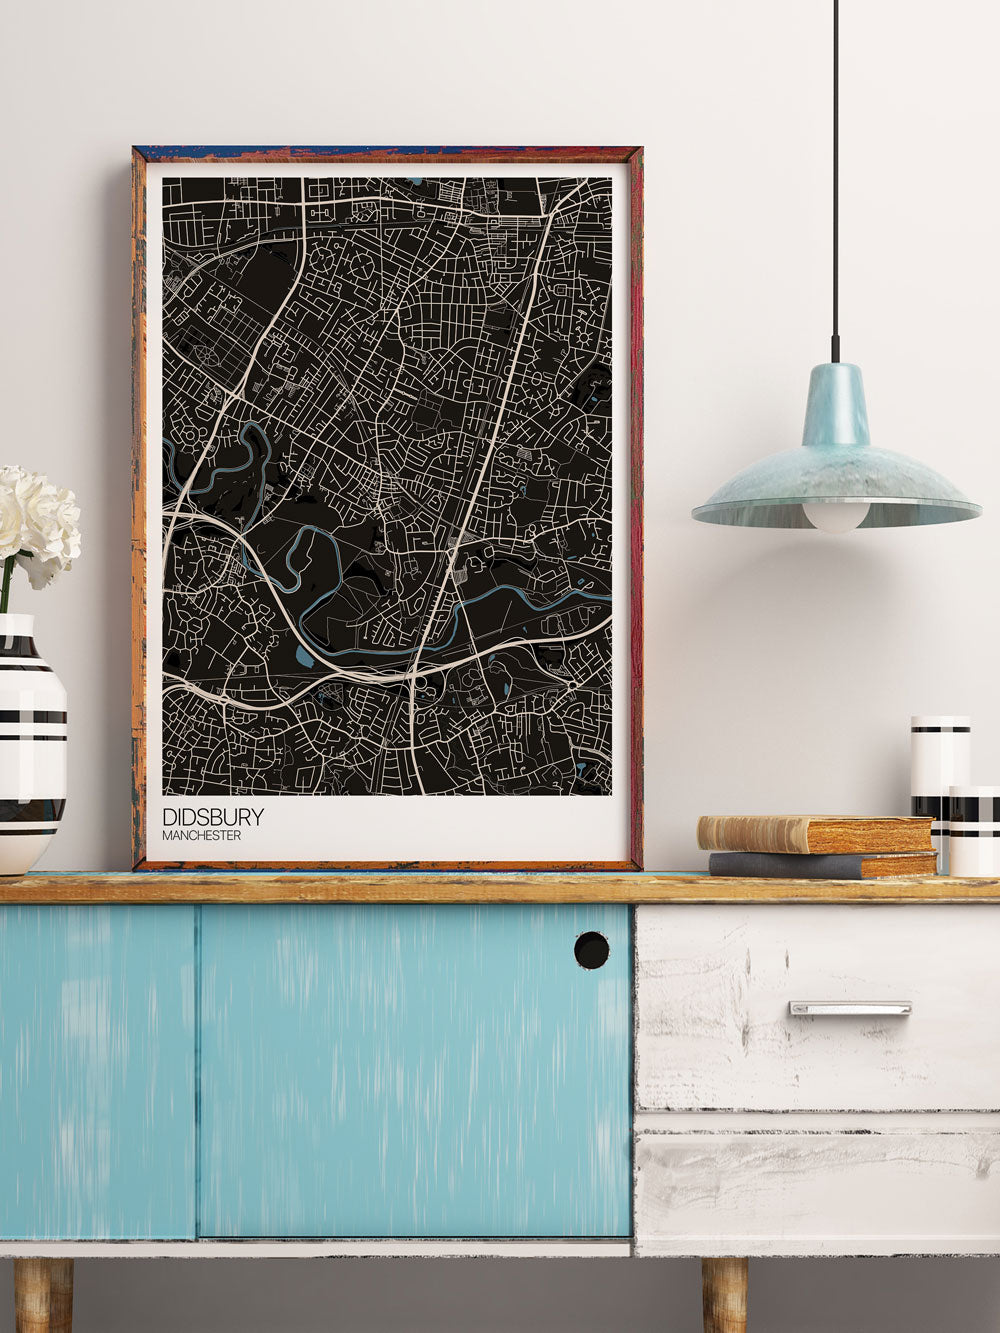 Didsbury Manchester Map Print on a side board